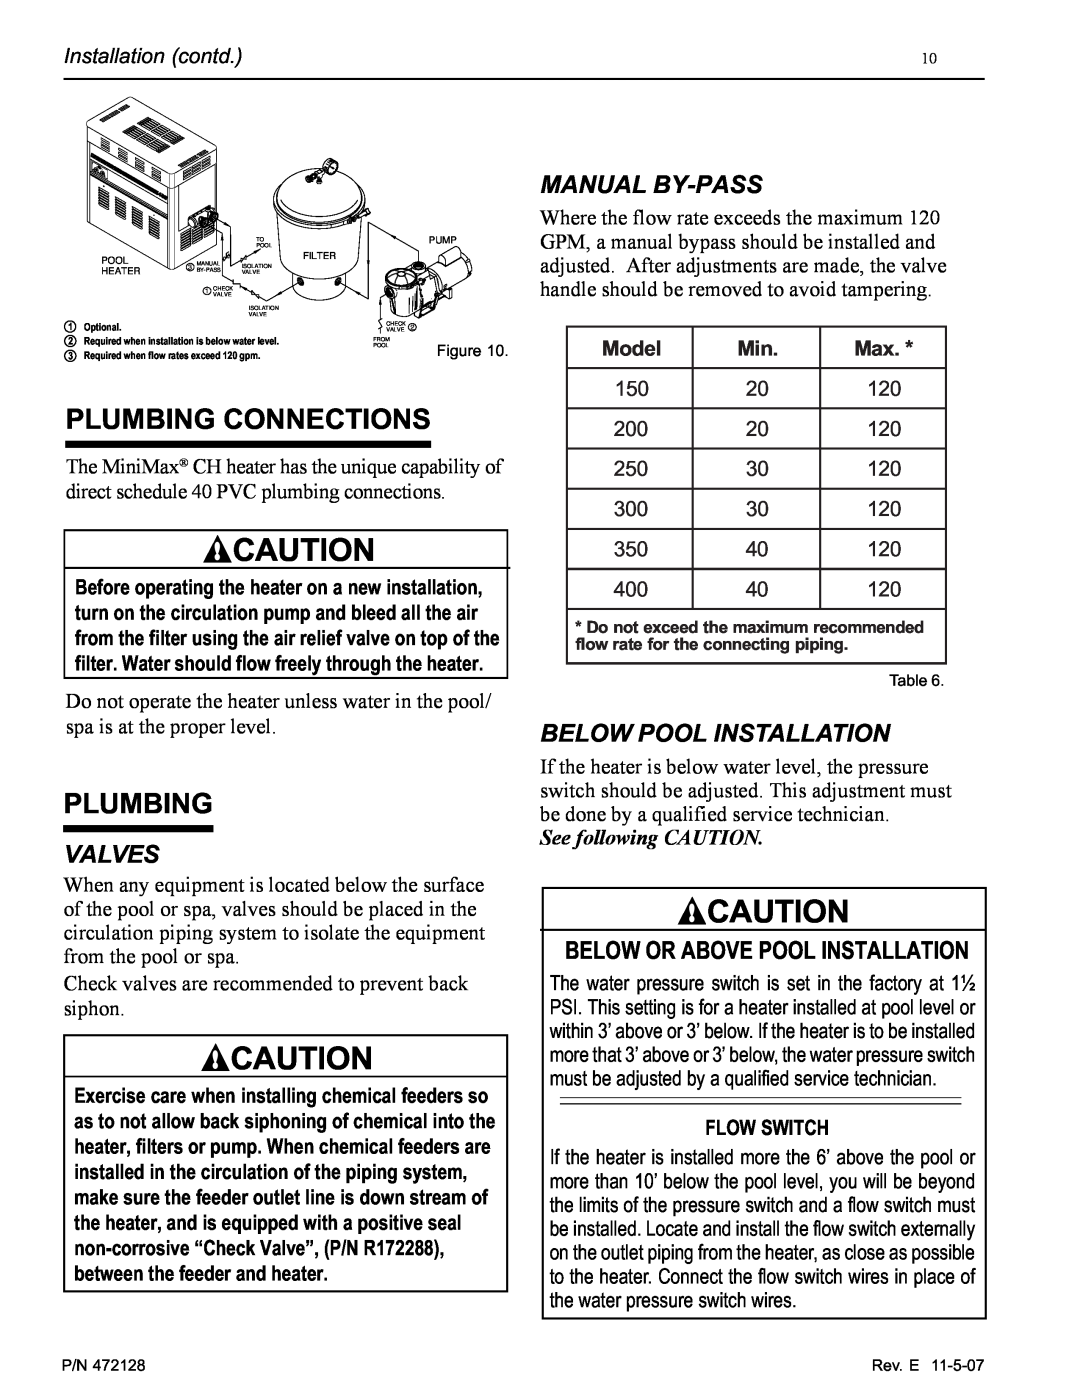 Pentair Hot Tub Plumbing Connections, Valves, Manual By-Pass, Below Pool Installation, Below Or Above Pool Installation 